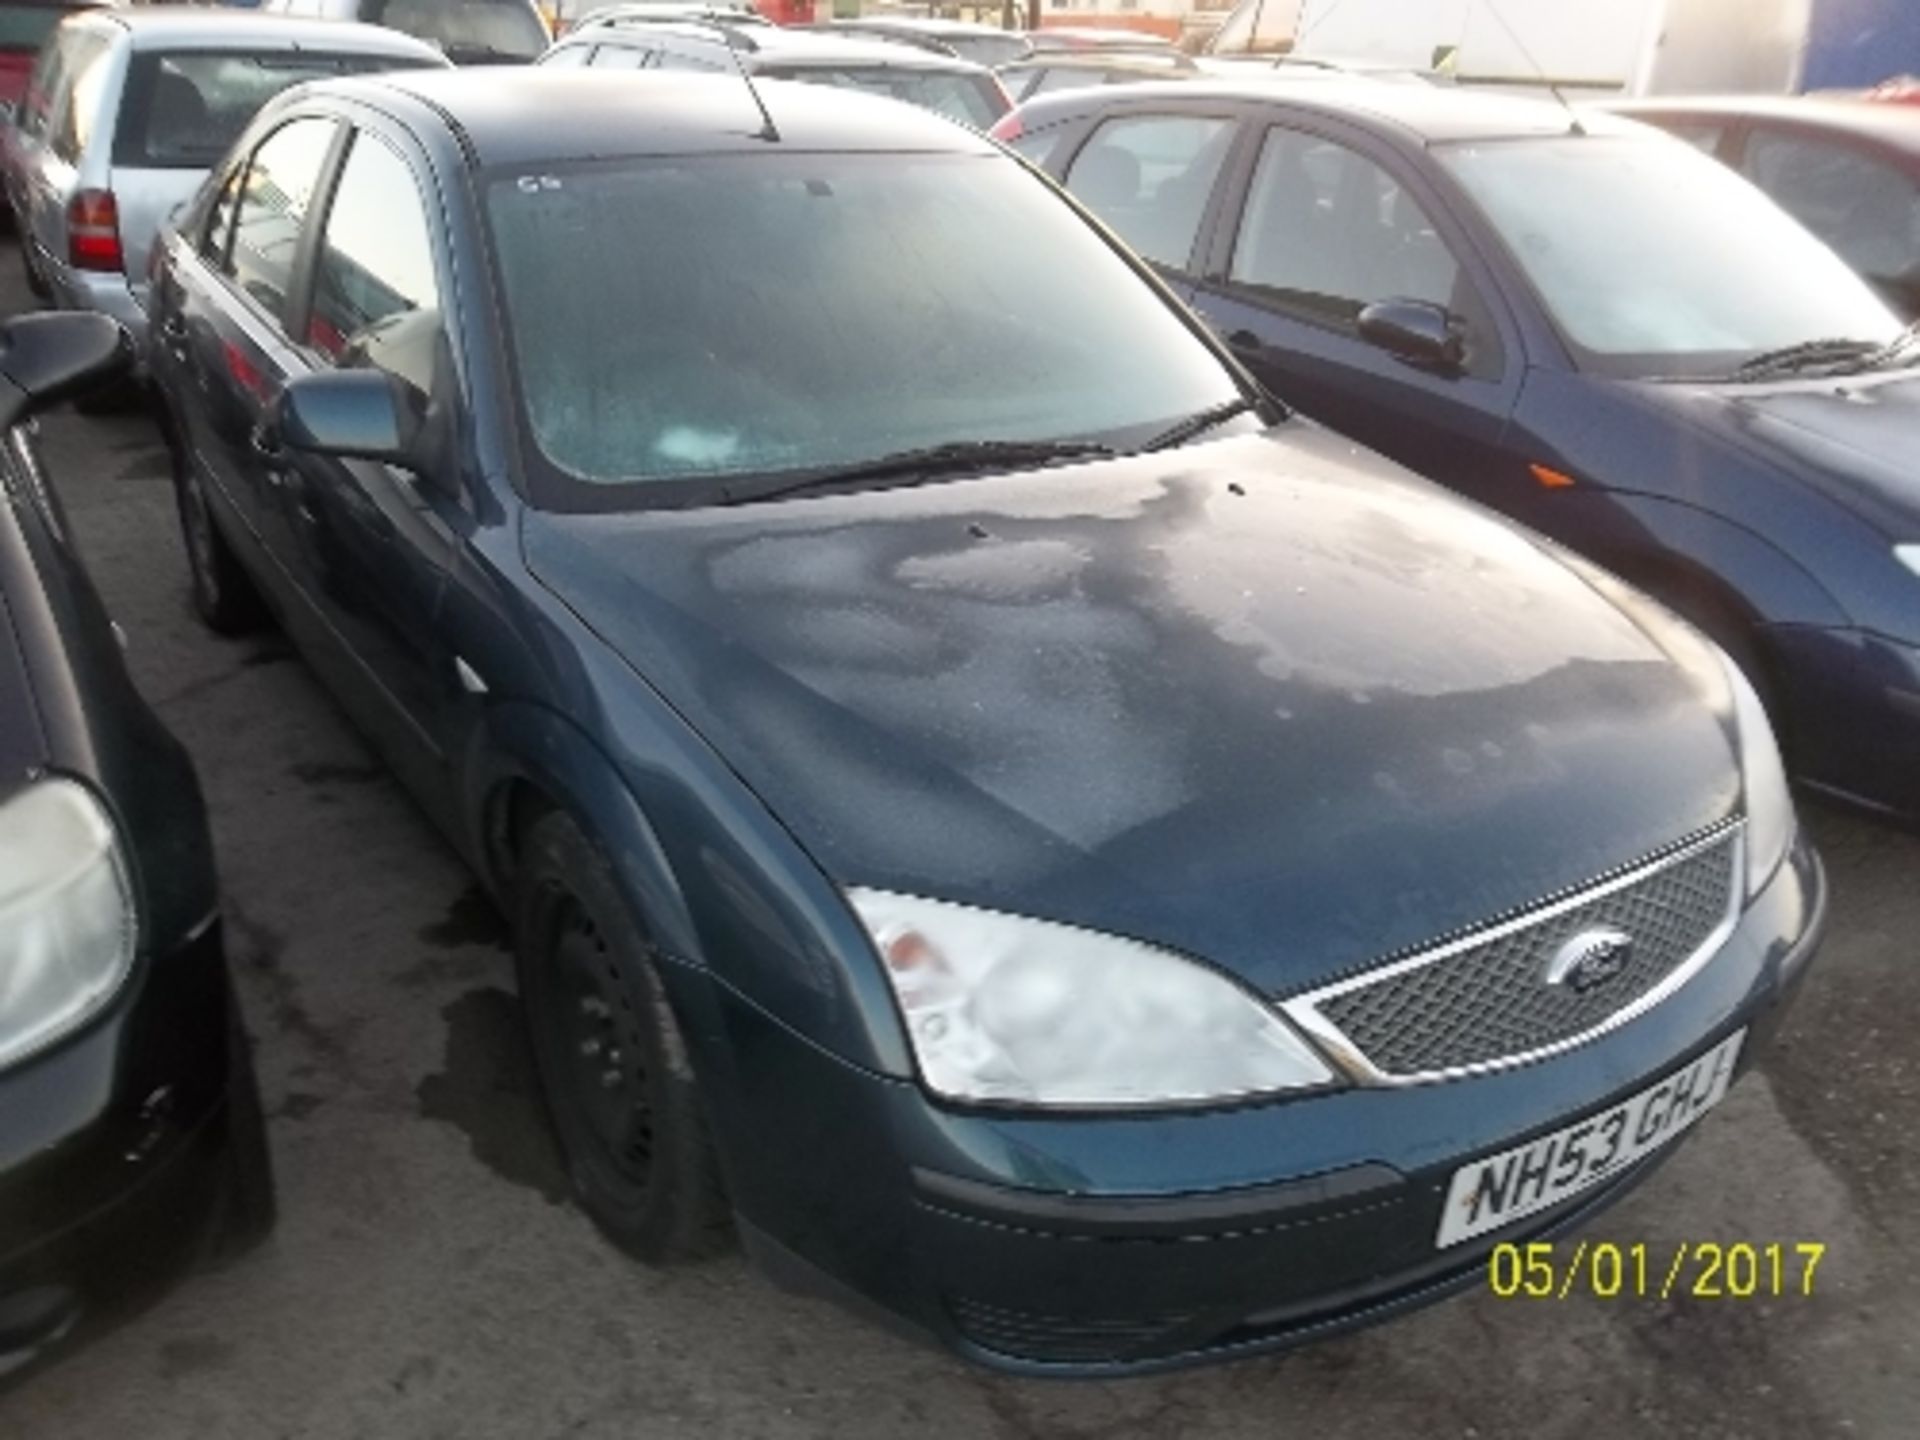 Ford Mondeo LX - NH53 GHJ Date of registration: 20.01.2004 1798cc, petrol, manual, blue Odometer - Image 2 of 4